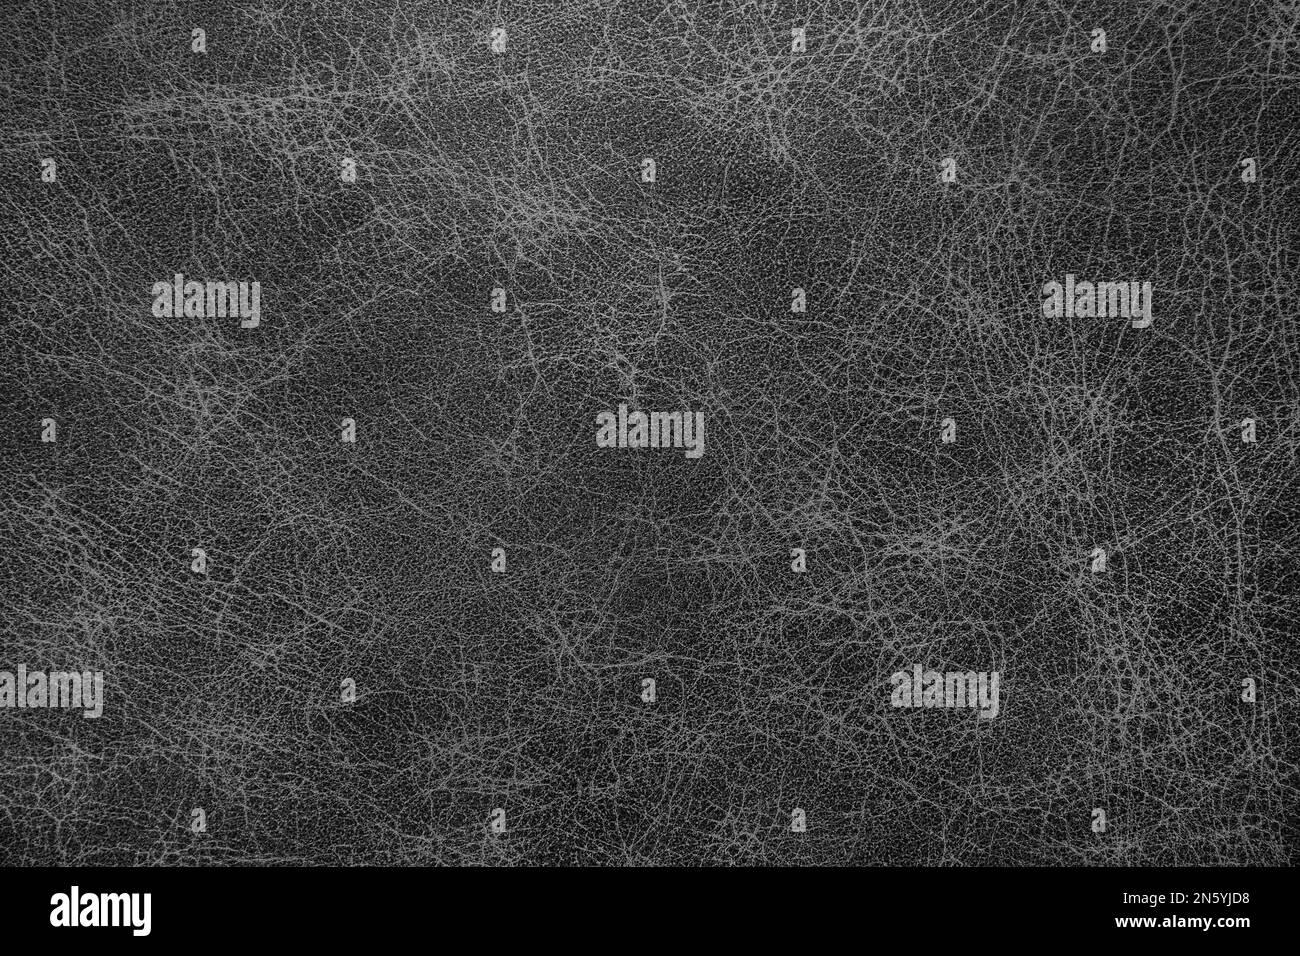 Genuine, natural, artificial black leather texture background. Luxury material for header, banner, backdrop, wallpaper, clothes, furniture and interio Stock Photo